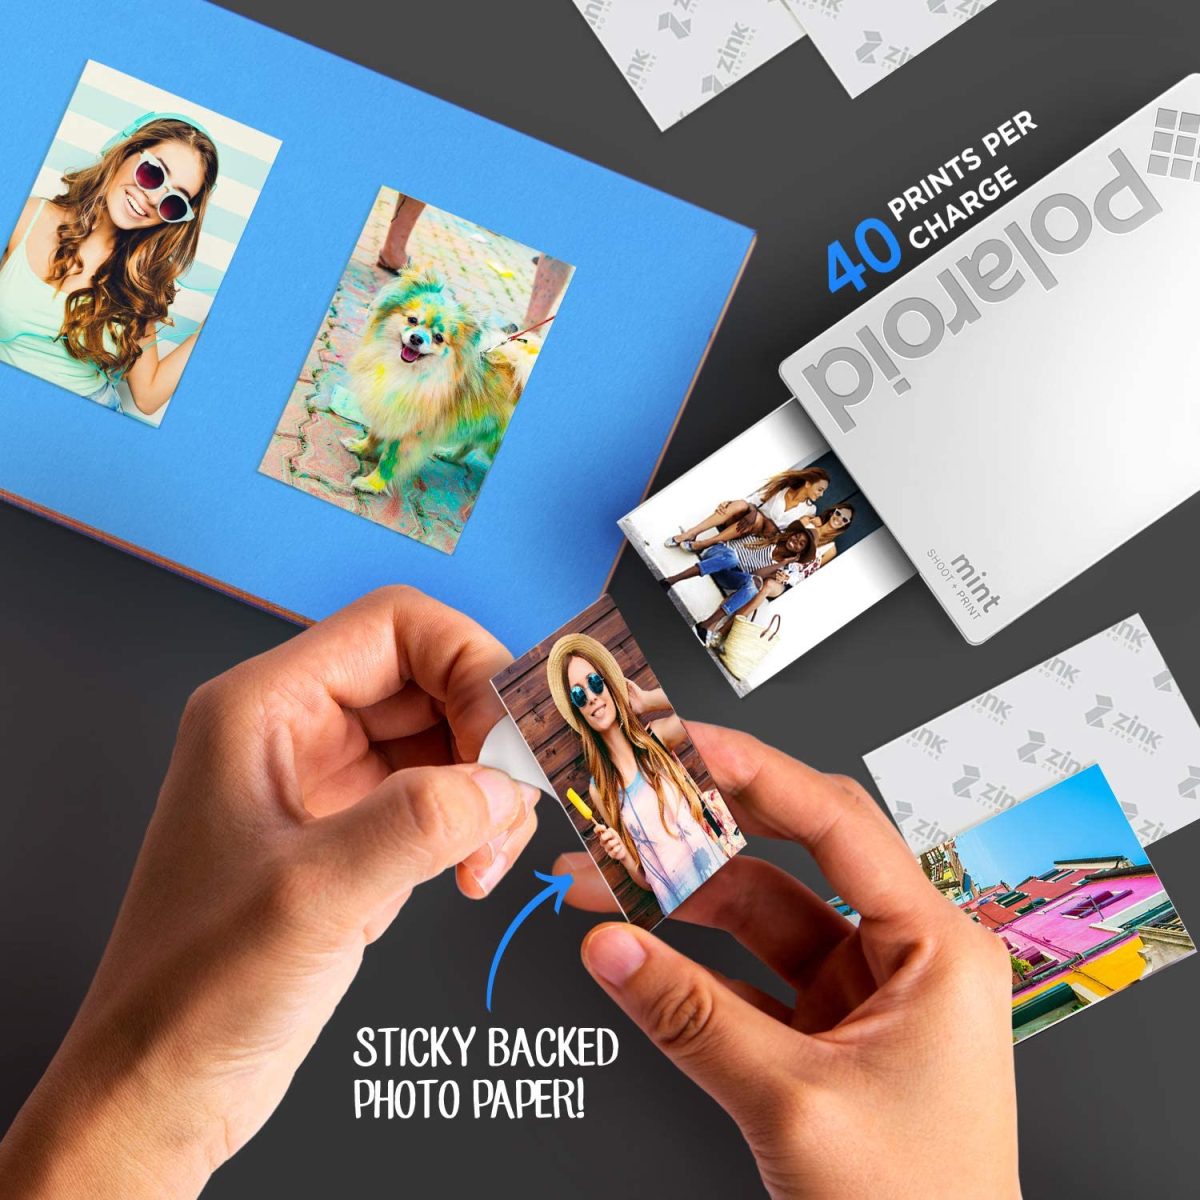 Polaroid Https://Www.youtube.com/Watch?V=Oqivlsmvng8 &Lt;Div Id=&Quot;Featurebullets_Feature_Div&Quot; Class=&Quot;Celwidget&Quot; Data-Feature-Name=&Quot;Featurebullets&Quot; Data-Cel-Widget=&Quot;Featurebullets_Feature_Div&Quot;&Gt; &Lt;Div Id=&Quot;Feature-Bullets&Quot; Class=&Quot;A-Section A-Spacing-Medium A-Spacing-Top-Small&Quot;&Gt; &Lt;Ul Class=&Quot;A-Unordered-List A-Vertical A-Spacing-Mini&Quot;&Gt; &Lt;Li&Gt;&Lt;Span Class=&Quot;A-List-Item&Quot;&Gt;Awesome Handheld Device Lets You Take 16 Megapixel Photographs &Amp; Print Instantly On 2X3 Inches Sticky Back Paper&Lt;/Span&Gt;&Lt;/Li&Gt; &Lt;Li&Gt;&Lt;Span Class=&Quot;A-List-Item&Quot;&Gt;Innovative Zero Ink Technology : There’s No Need For Pricy Toner; Zink Cartridges Combine Paper &Amp; Ink All; Packs Available In 20, 30 Or 50 Sheets&Lt;/Span&Gt;&Lt;/Li&Gt; &Lt;Li&Gt;&Lt;Span Class=&Quot;A-List-Item&Quot;&Gt;Unique Vertical Orientation : Modern Design Lets You Snap Upright, Just Like A Smartphone&Lt;/Span&Gt;&Lt;/Li&Gt; &Lt;Li&Gt;&Lt;Span Class=&Quot;A-List-Item&Quot;&Gt;A Mode For Every Mood : Simple Operation &Amp; Design Includes [6] Easy Picture Settings; Choose From Vibrant Color, Black &Amp; White Or Vintage Effect&Lt;/Span&Gt;&Lt;/Li&Gt; &Lt;Li&Gt;&Lt;Span Class=&Quot;A-List-Item&Quot;&Gt;Fashion Forward &Amp; Travel Friendly : Pick From [5] Fabulously Vibrant Colors; Pocket Sized Camera Measures 4. 6 X 3. 1 X 0. 8 Inches &Amp; Weighs Only 6 Ounces&Lt;/Span&Gt;&Lt;/Li&Gt; &Lt;Li&Gt;&Lt;Span Class=&Quot;A-List-Item&Quot;&Gt;Viewfinder Type: Optical&Lt;/Span&Gt;&Lt;/Li&Gt; &Lt;/Ul&Gt; &Lt;/Div&Gt; &Lt;/Div&Gt; Polaroid Mint Instant Print Digital Camera - Black